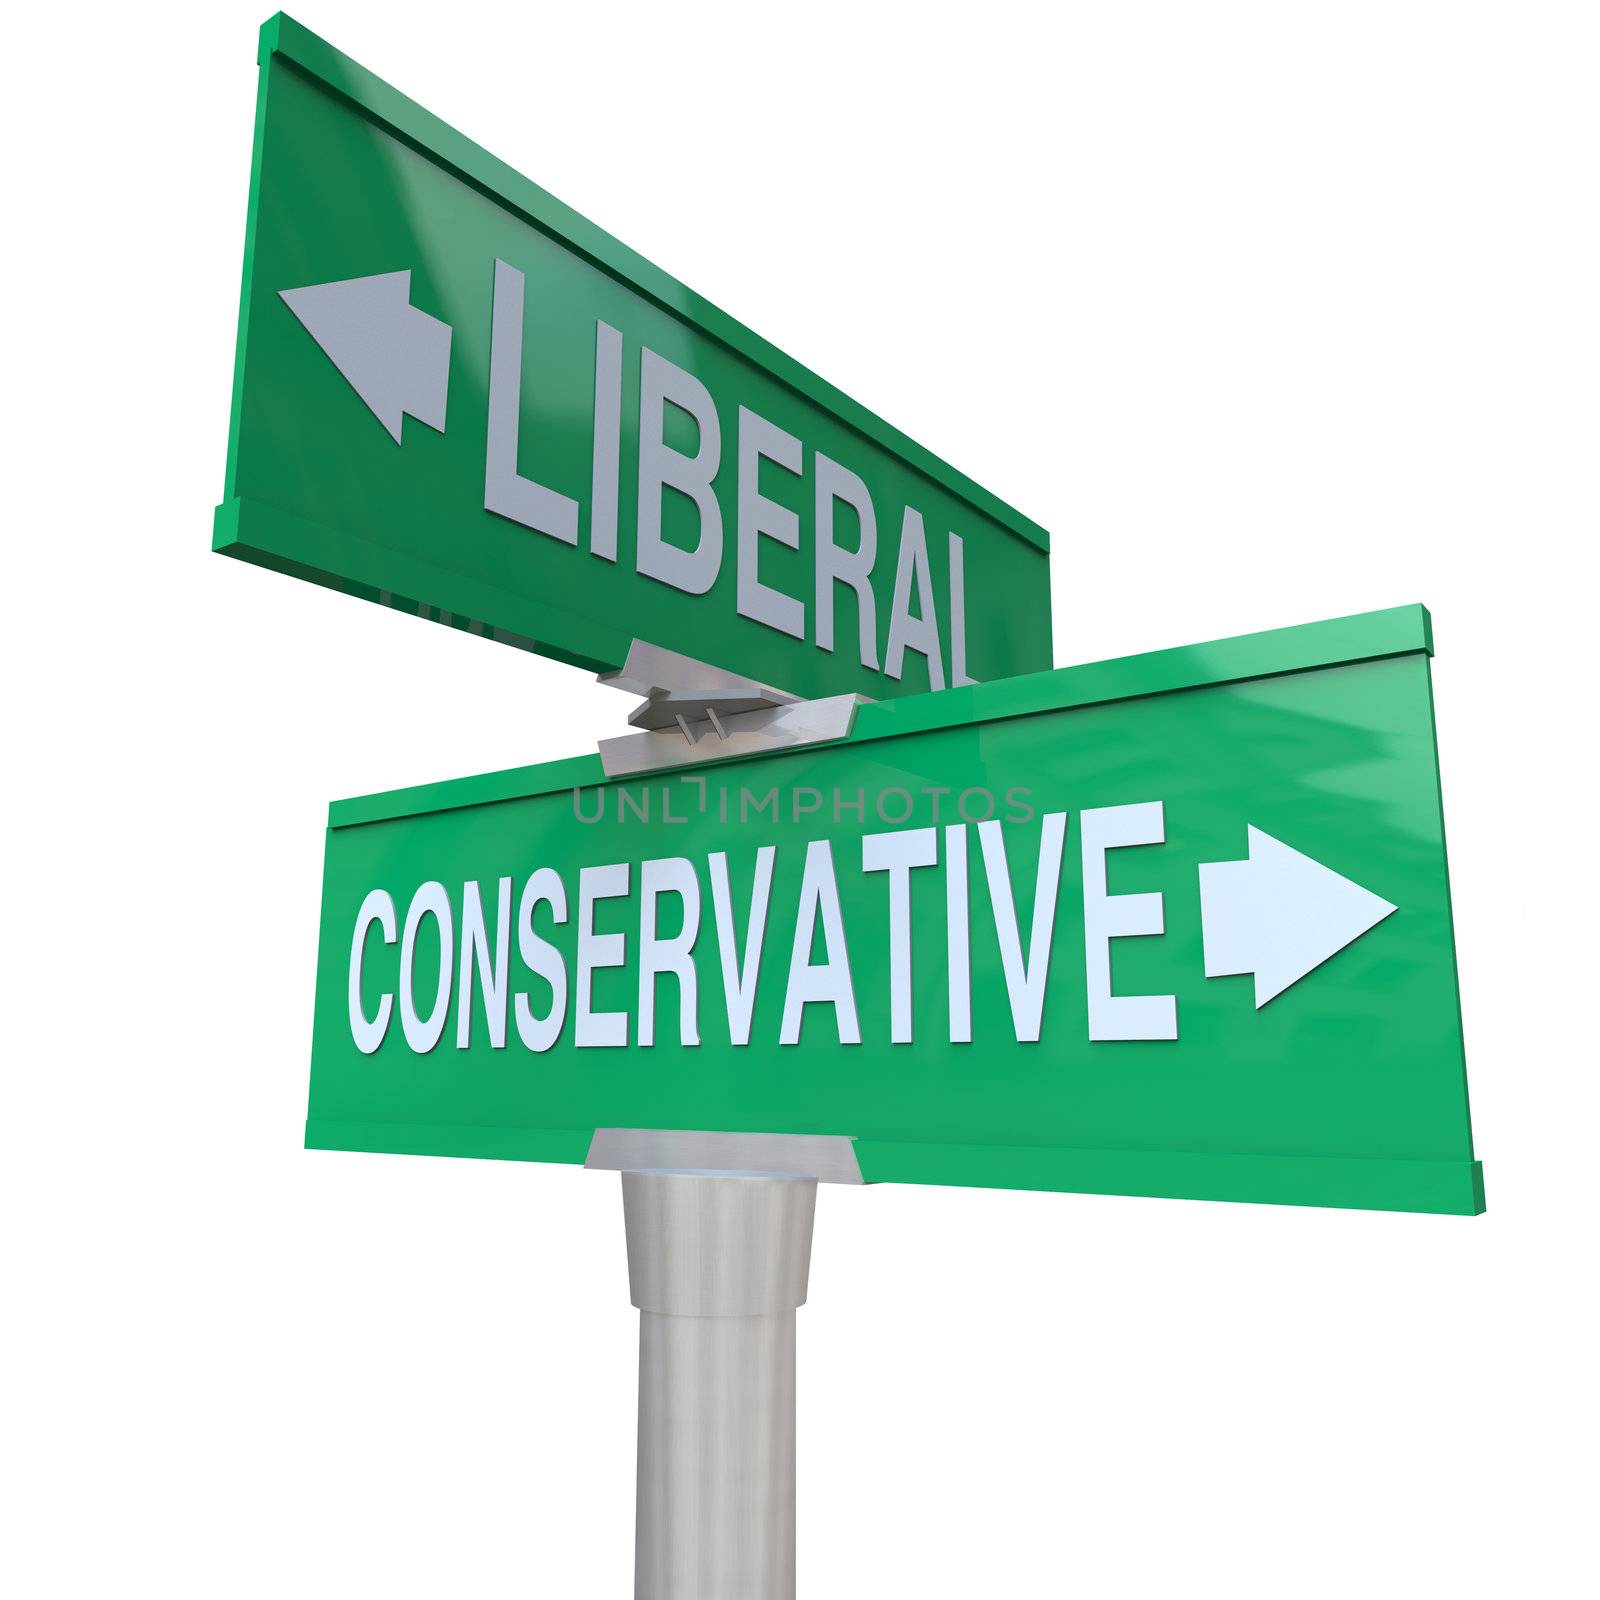 A green two-way street sign pointing to Liberal and Conservative, representing the two dominant political parties and ideologies in national and global politics